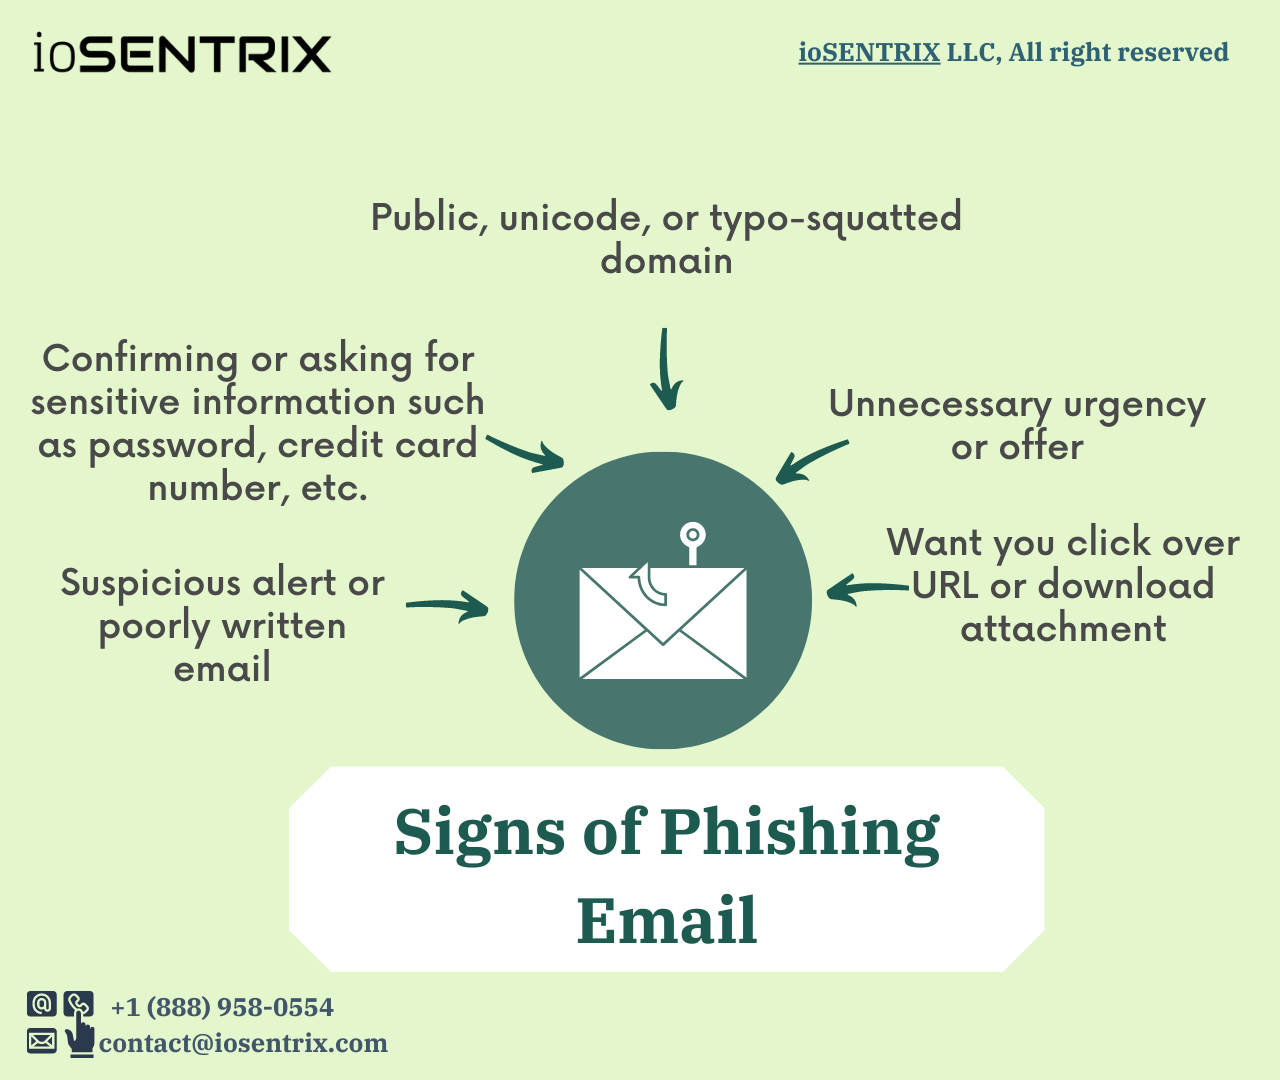 Signs of Phishing Emails